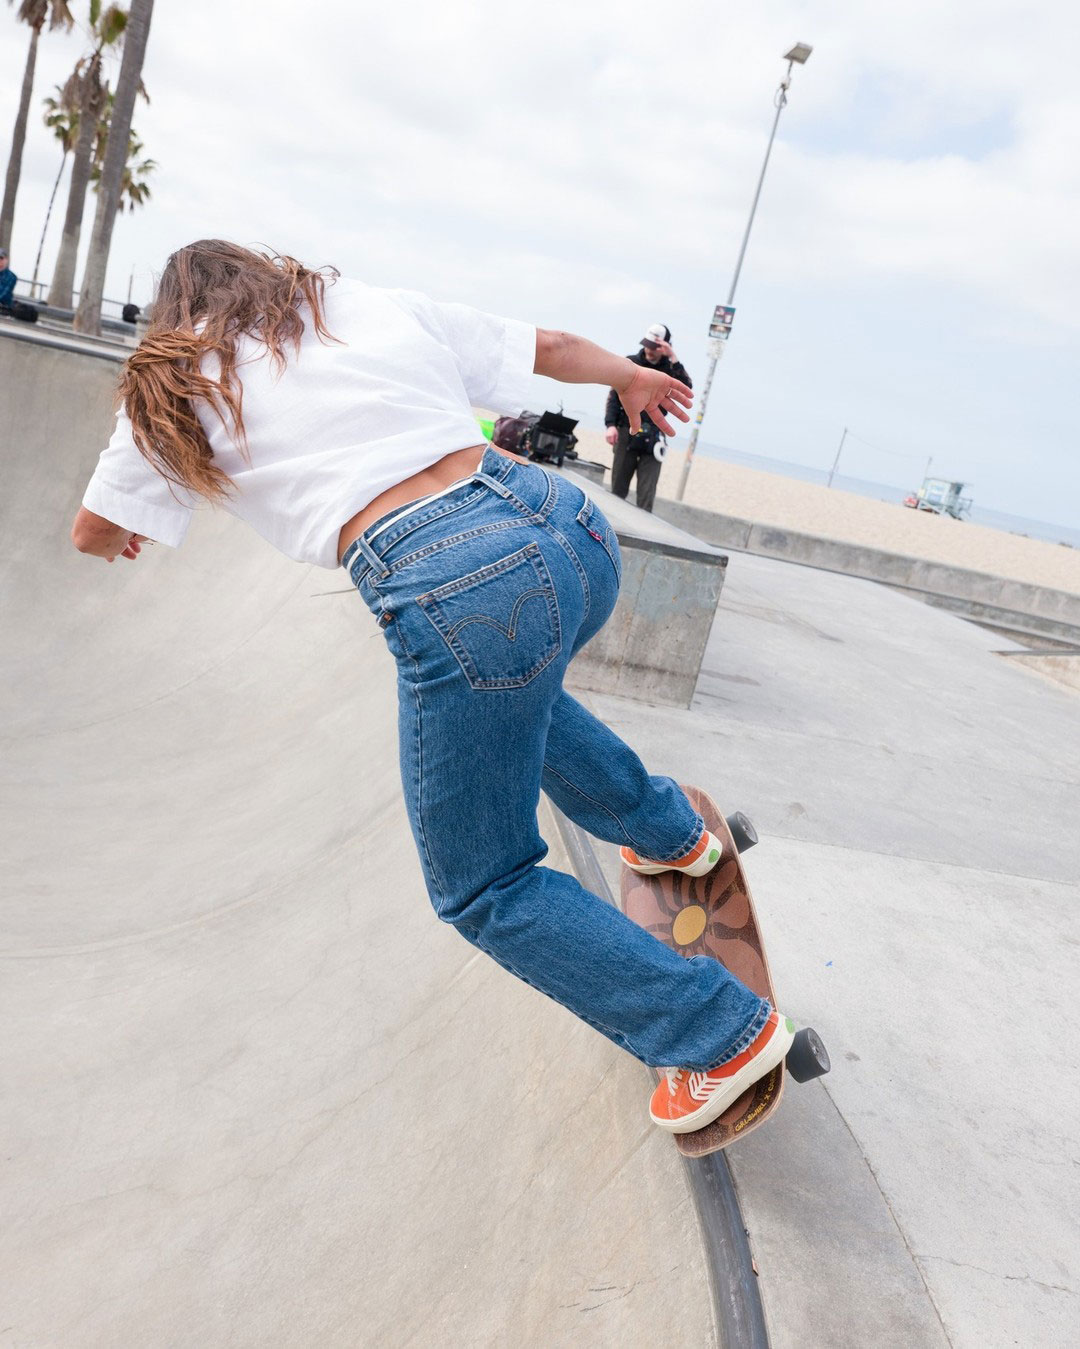 A female skating on the rim of a skate bowl wearing a white t-shirt and blue Levi's jeans.